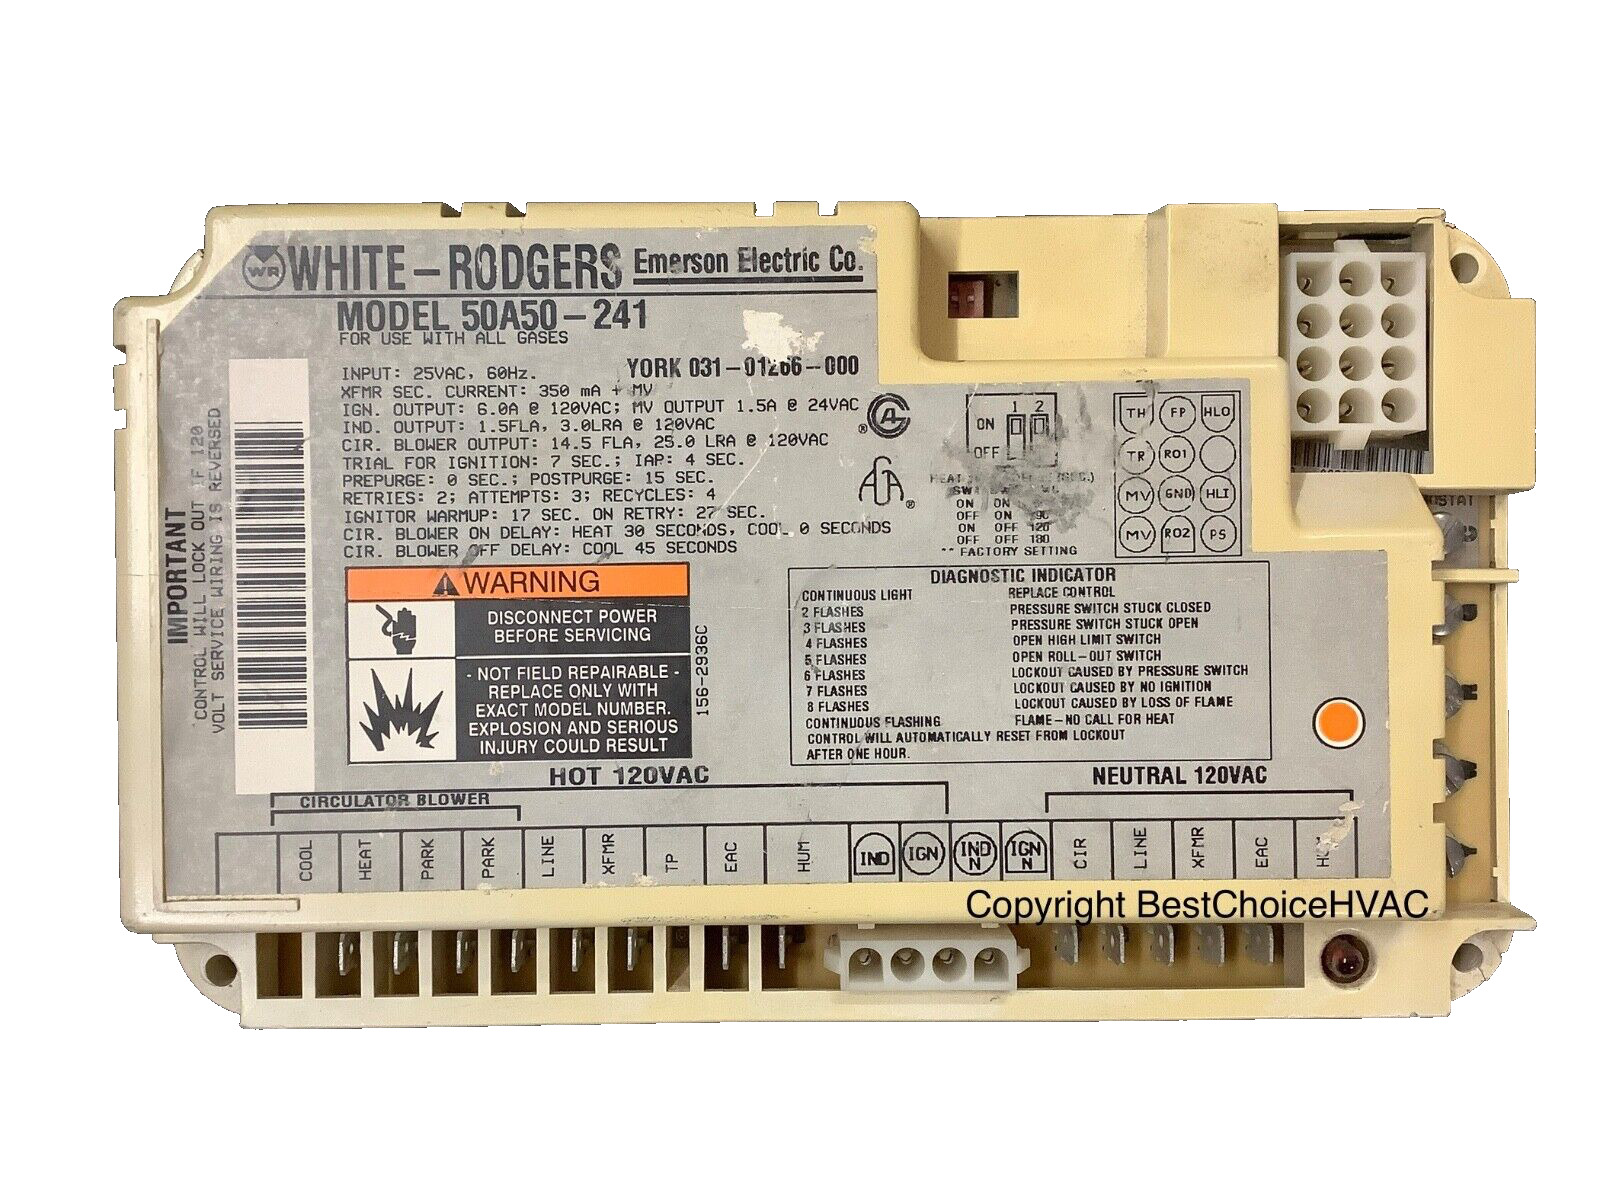 90-DAY WARRANTY 50A50-241 Furnace control board 031-01266 York White Rodgers